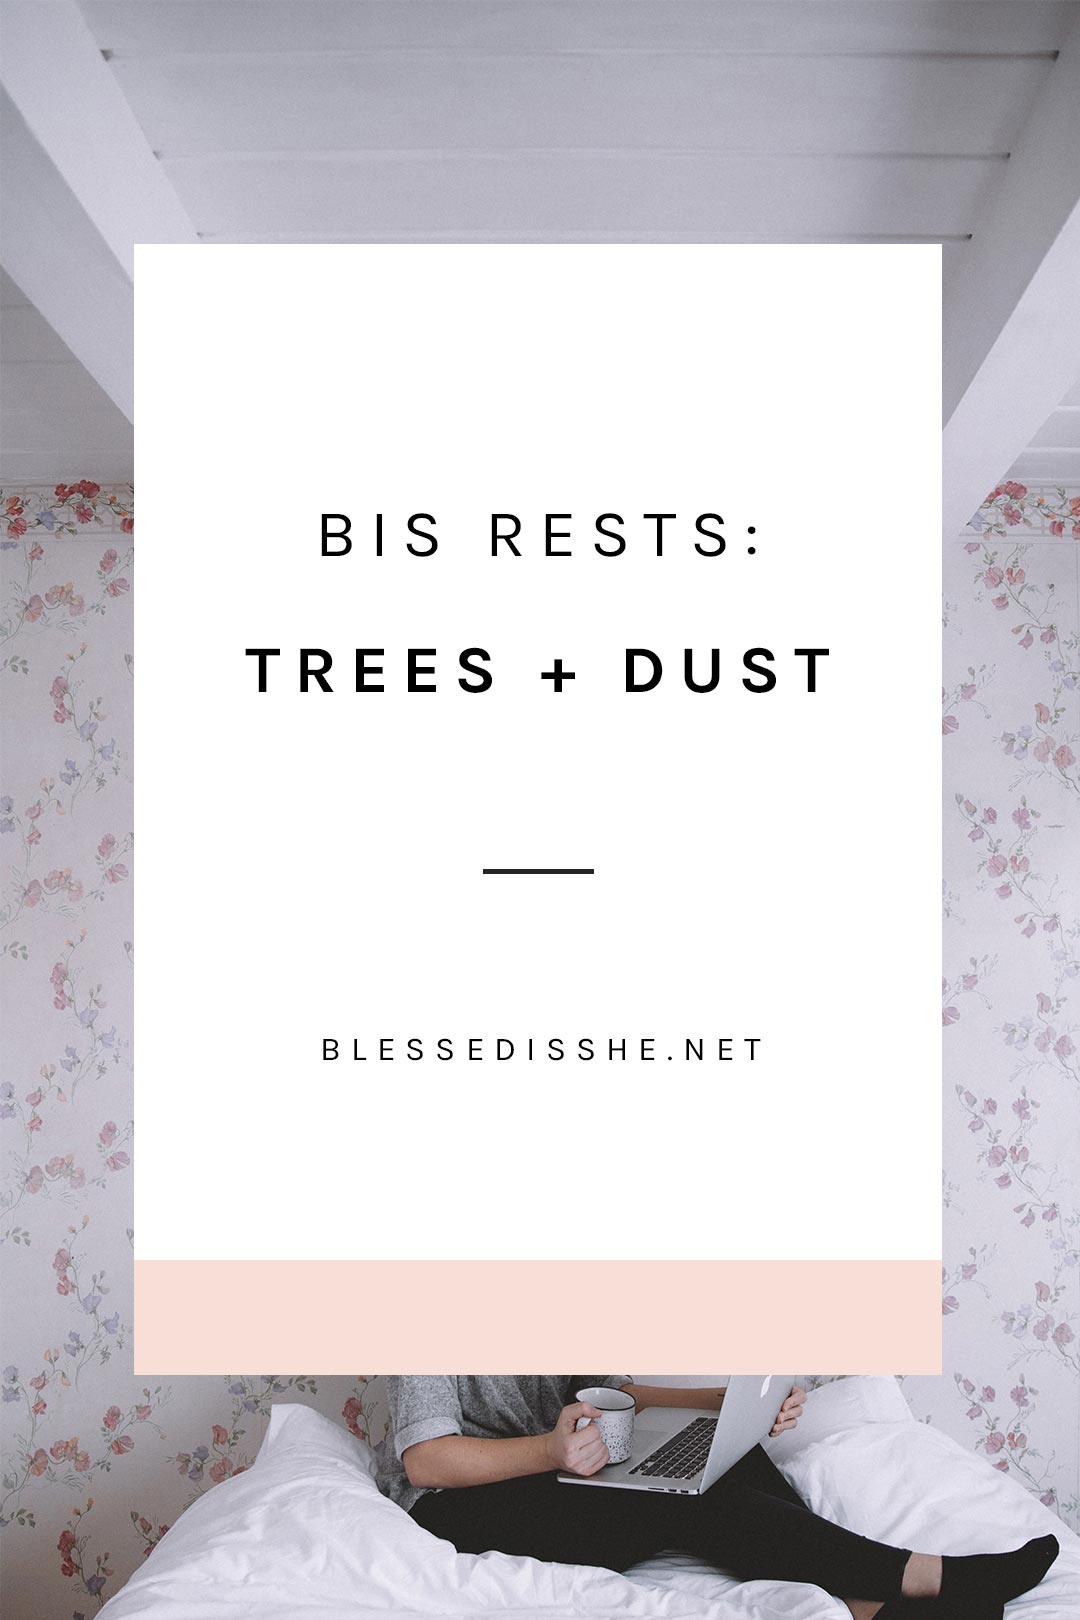 bis rests trees + dust